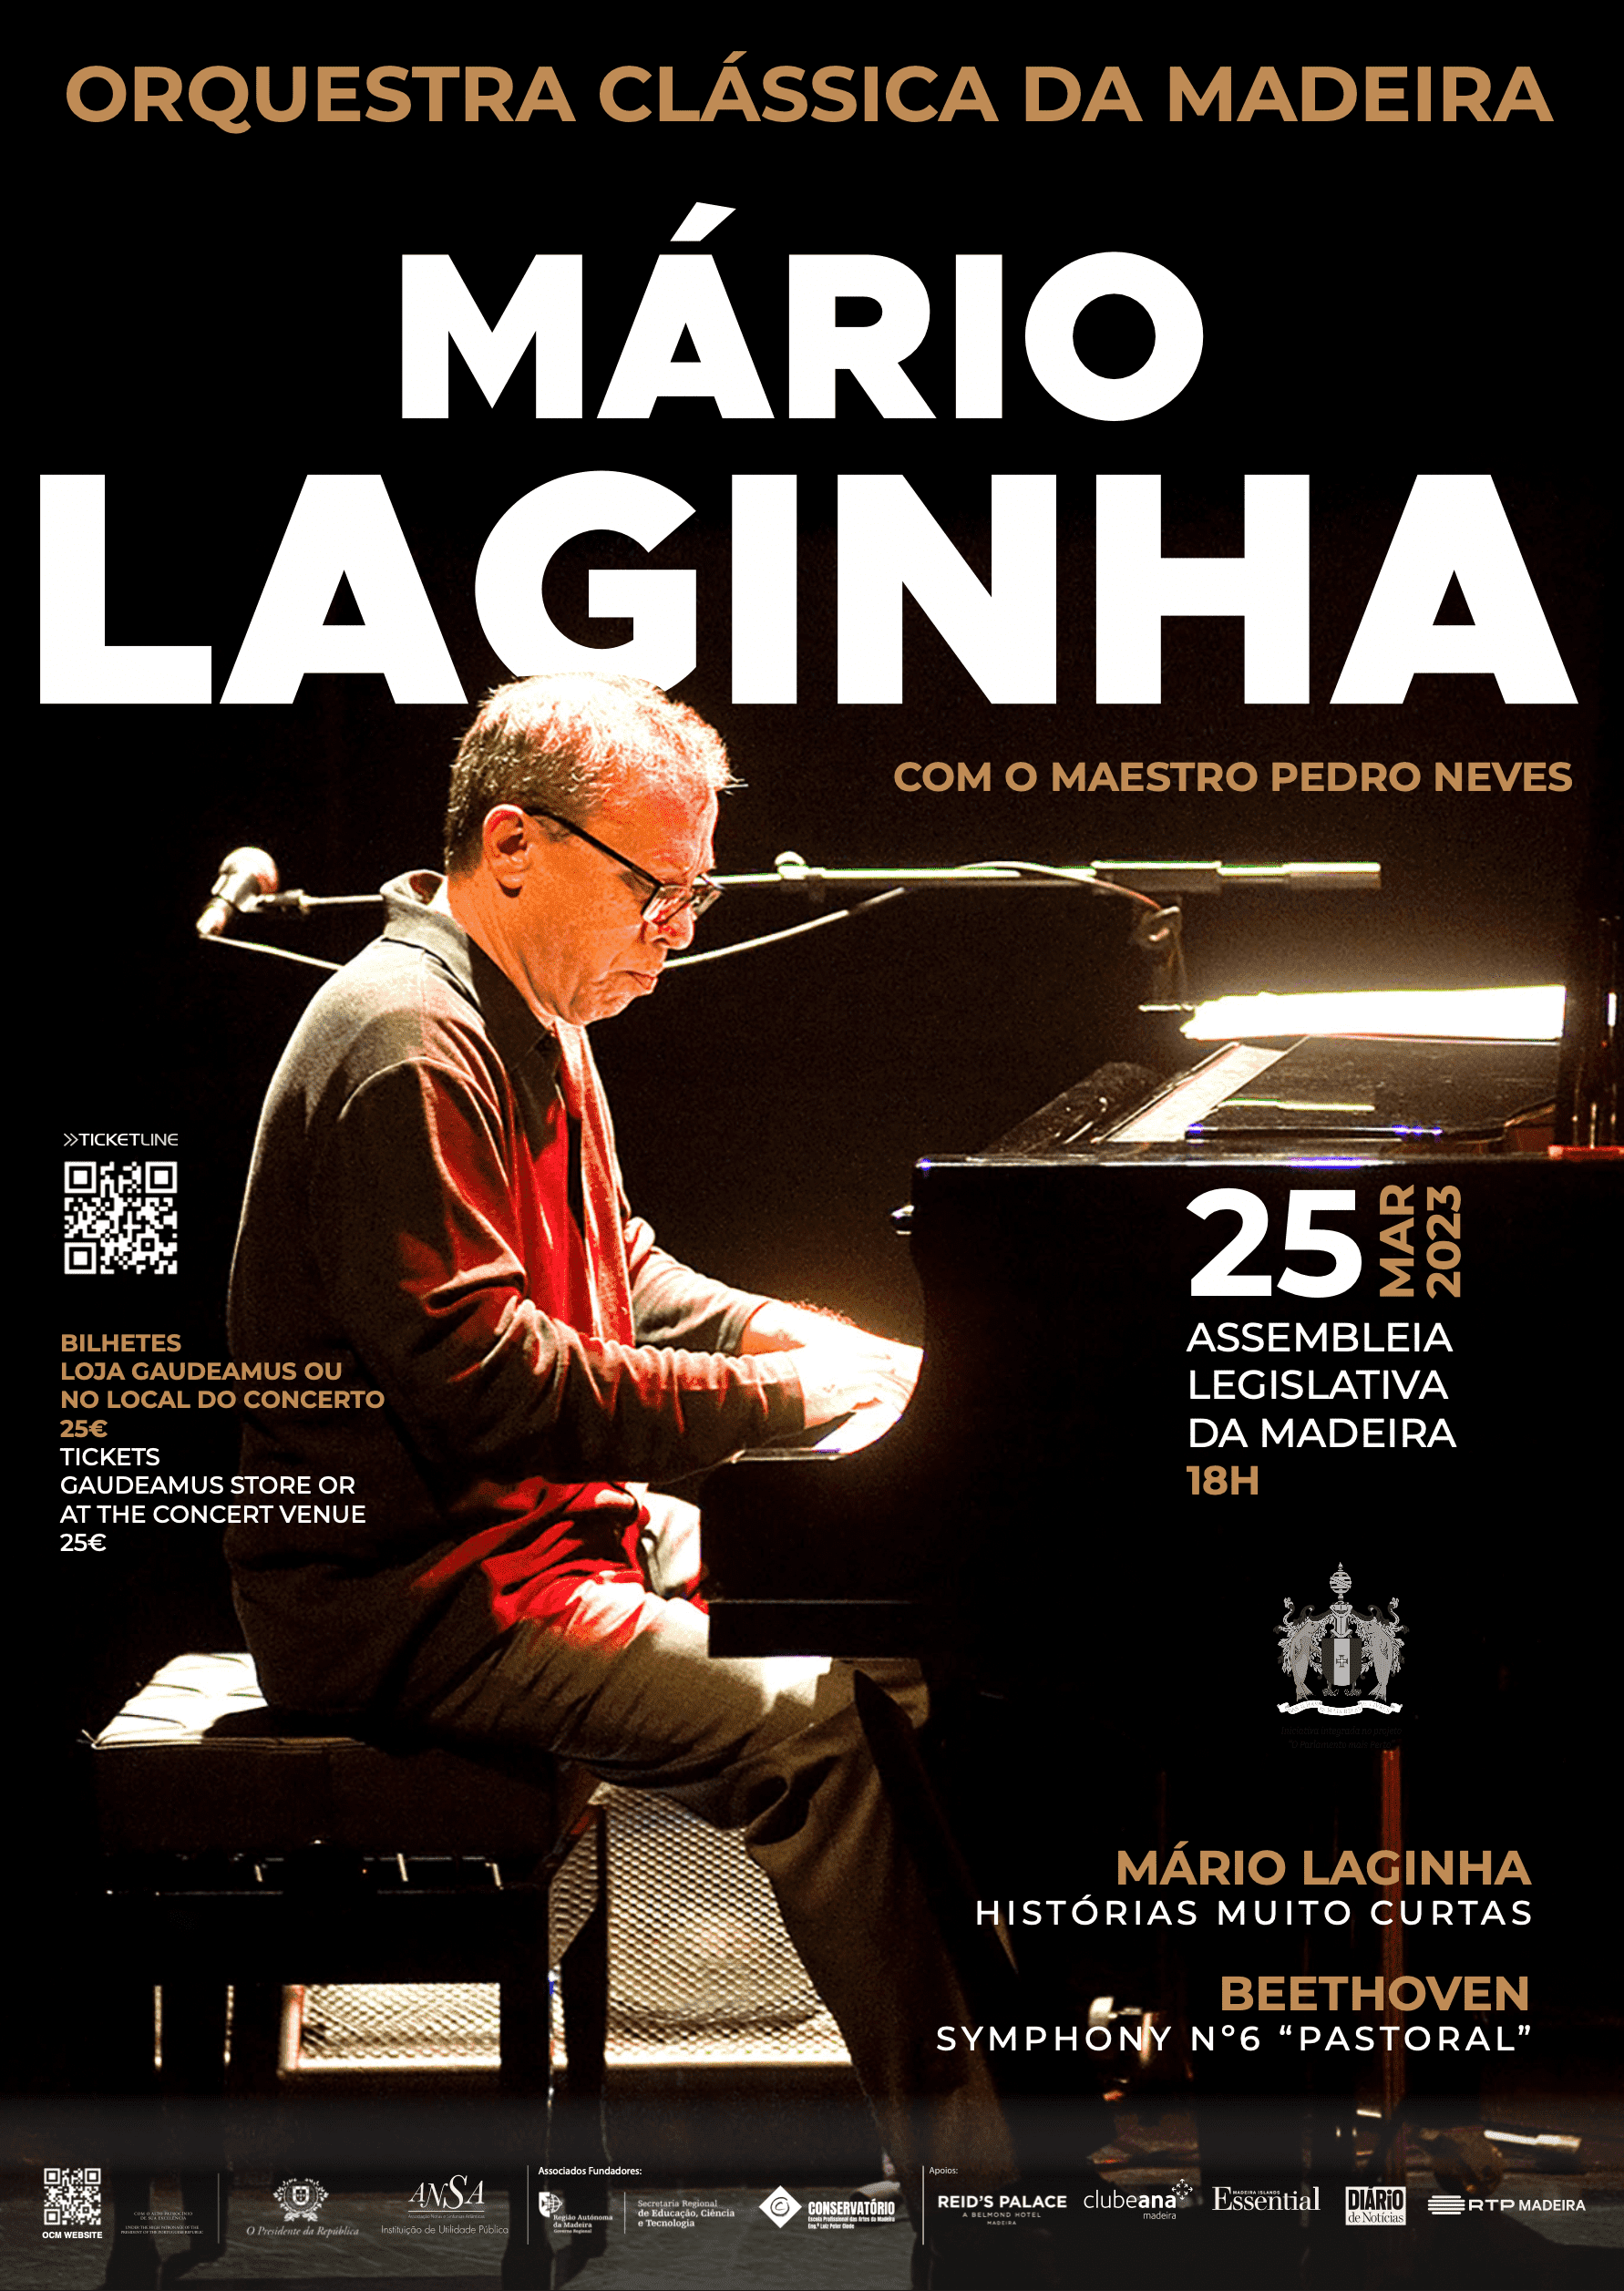 The Orchestra and the Musical language of Mário Laginha